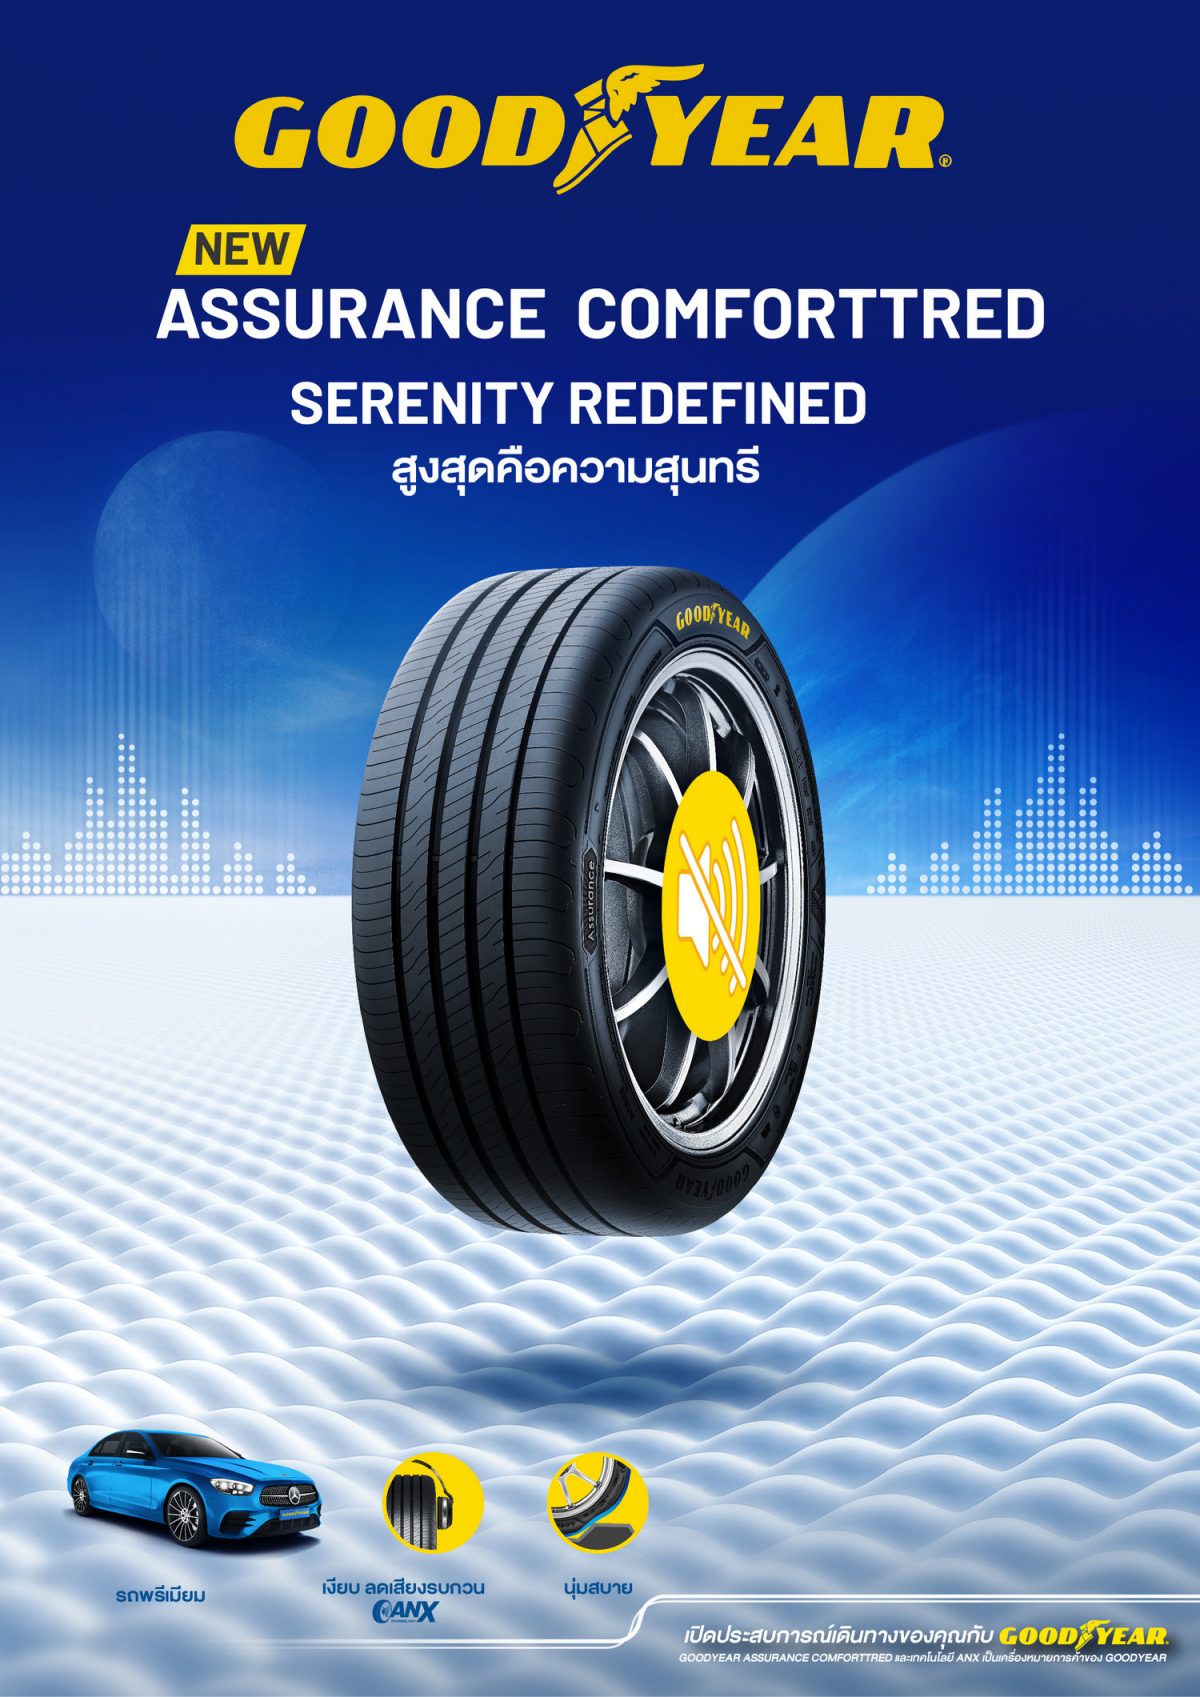 GOODYEAR LAUNCHES THE ASSURANCE COMFORTTRED FOR THE ULTIMATE COMFORTABLE RIDE